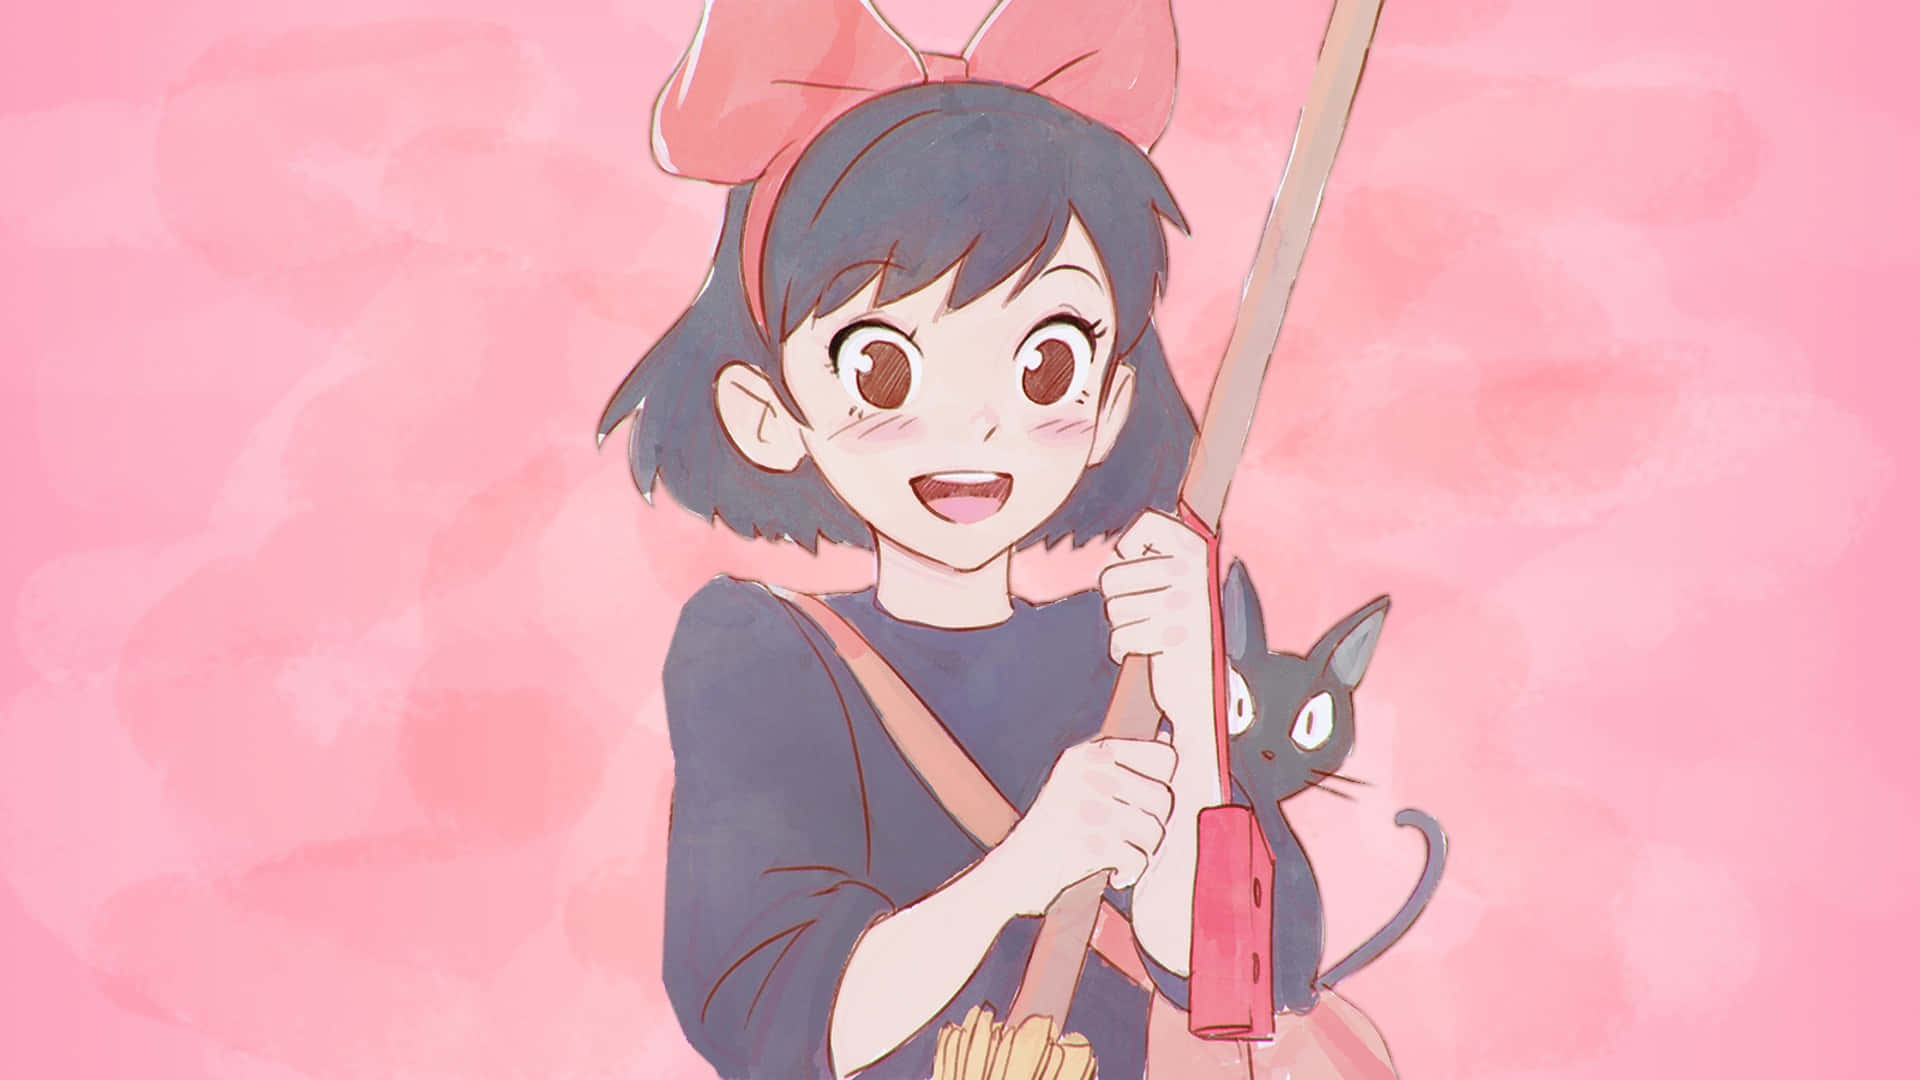 Kiki flying on her broomstick with Jiji the cat Wallpaper